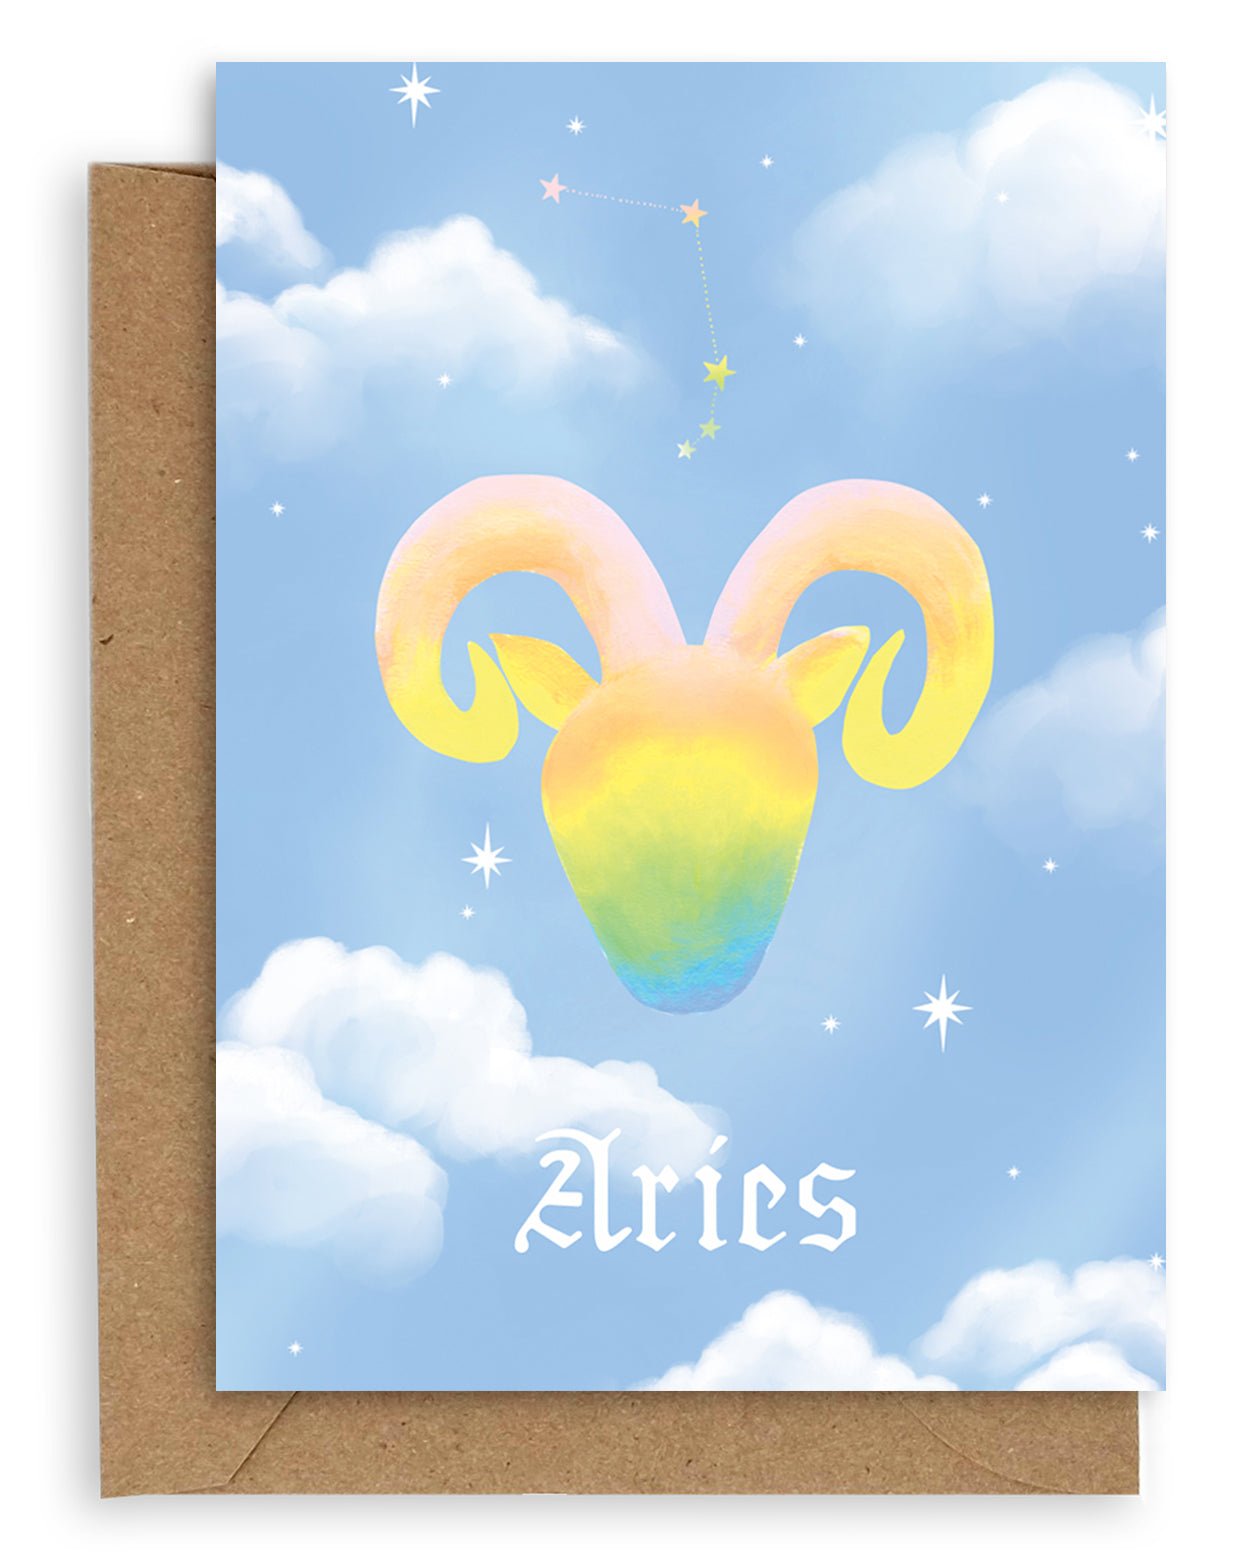 Aries  Horoscope card with a kraft envelope. The horoscope symbol is painted in rainbow pastel on a blue background with white clouds. 